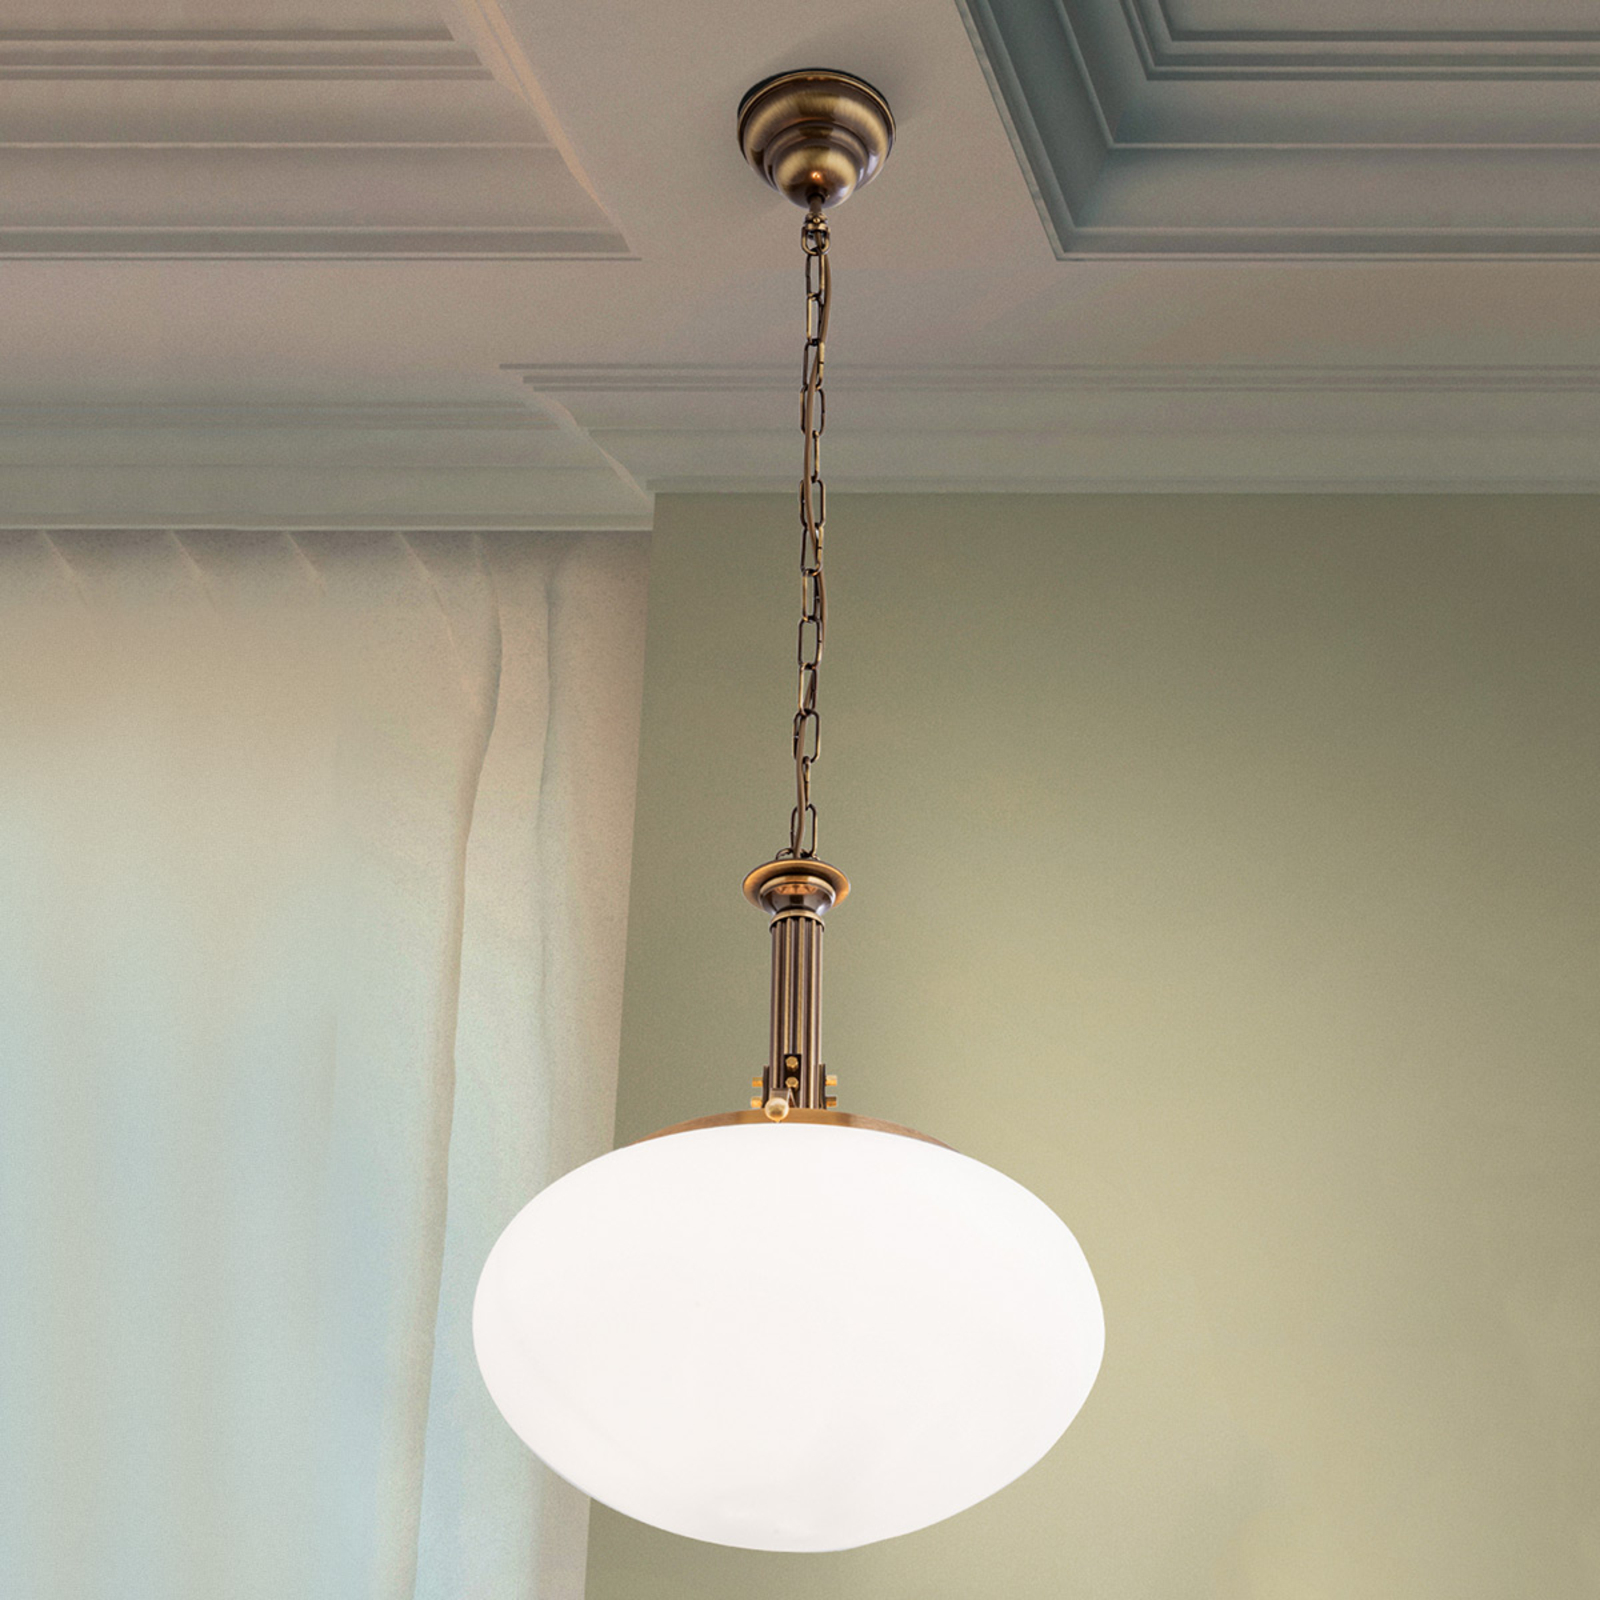 Delia hanging light in antique brass, one-bulb